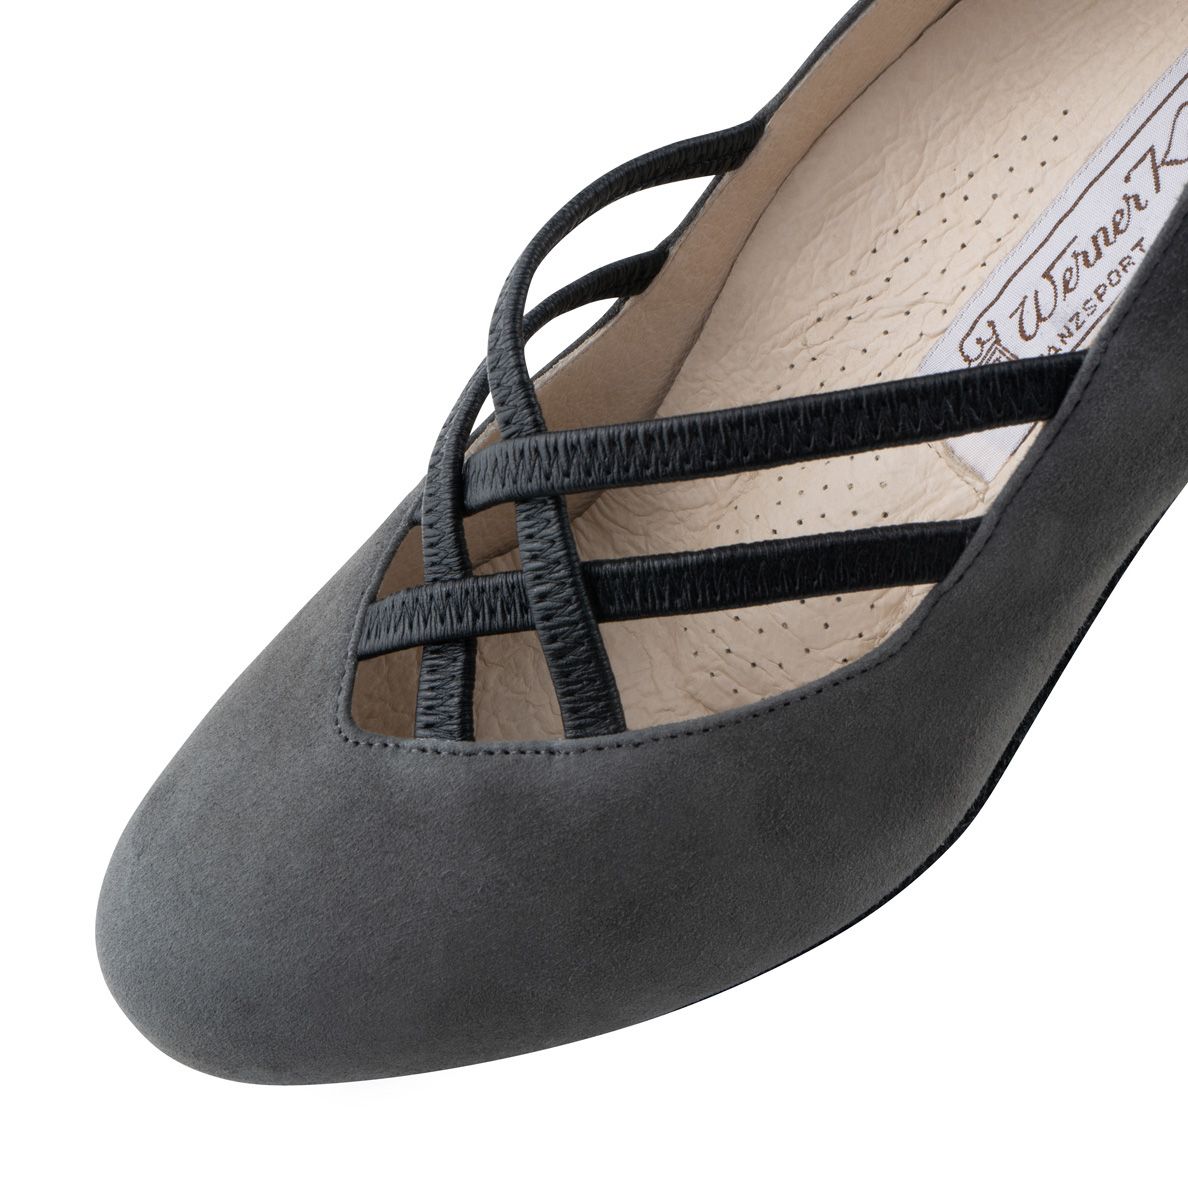 Werner Kern Anke Ladies Ballroom Shoes in Grey Suede with Criss Cross Detail Above Toebed